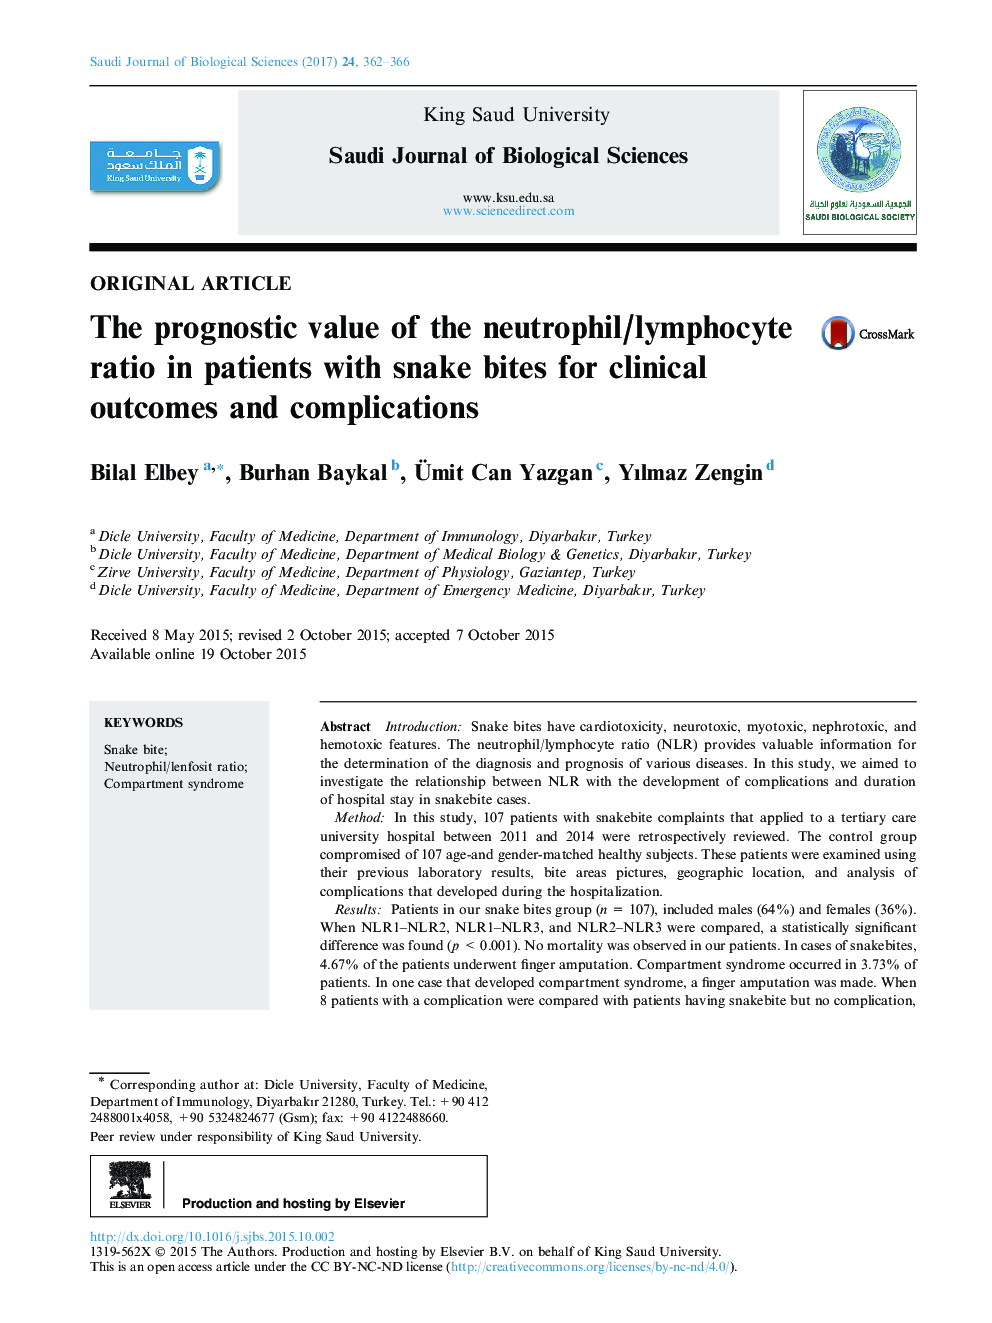 Original articleThe prognostic value of the neutrophil/lymphocyte ratio in patients with snake bites for clinical outcomes and complications